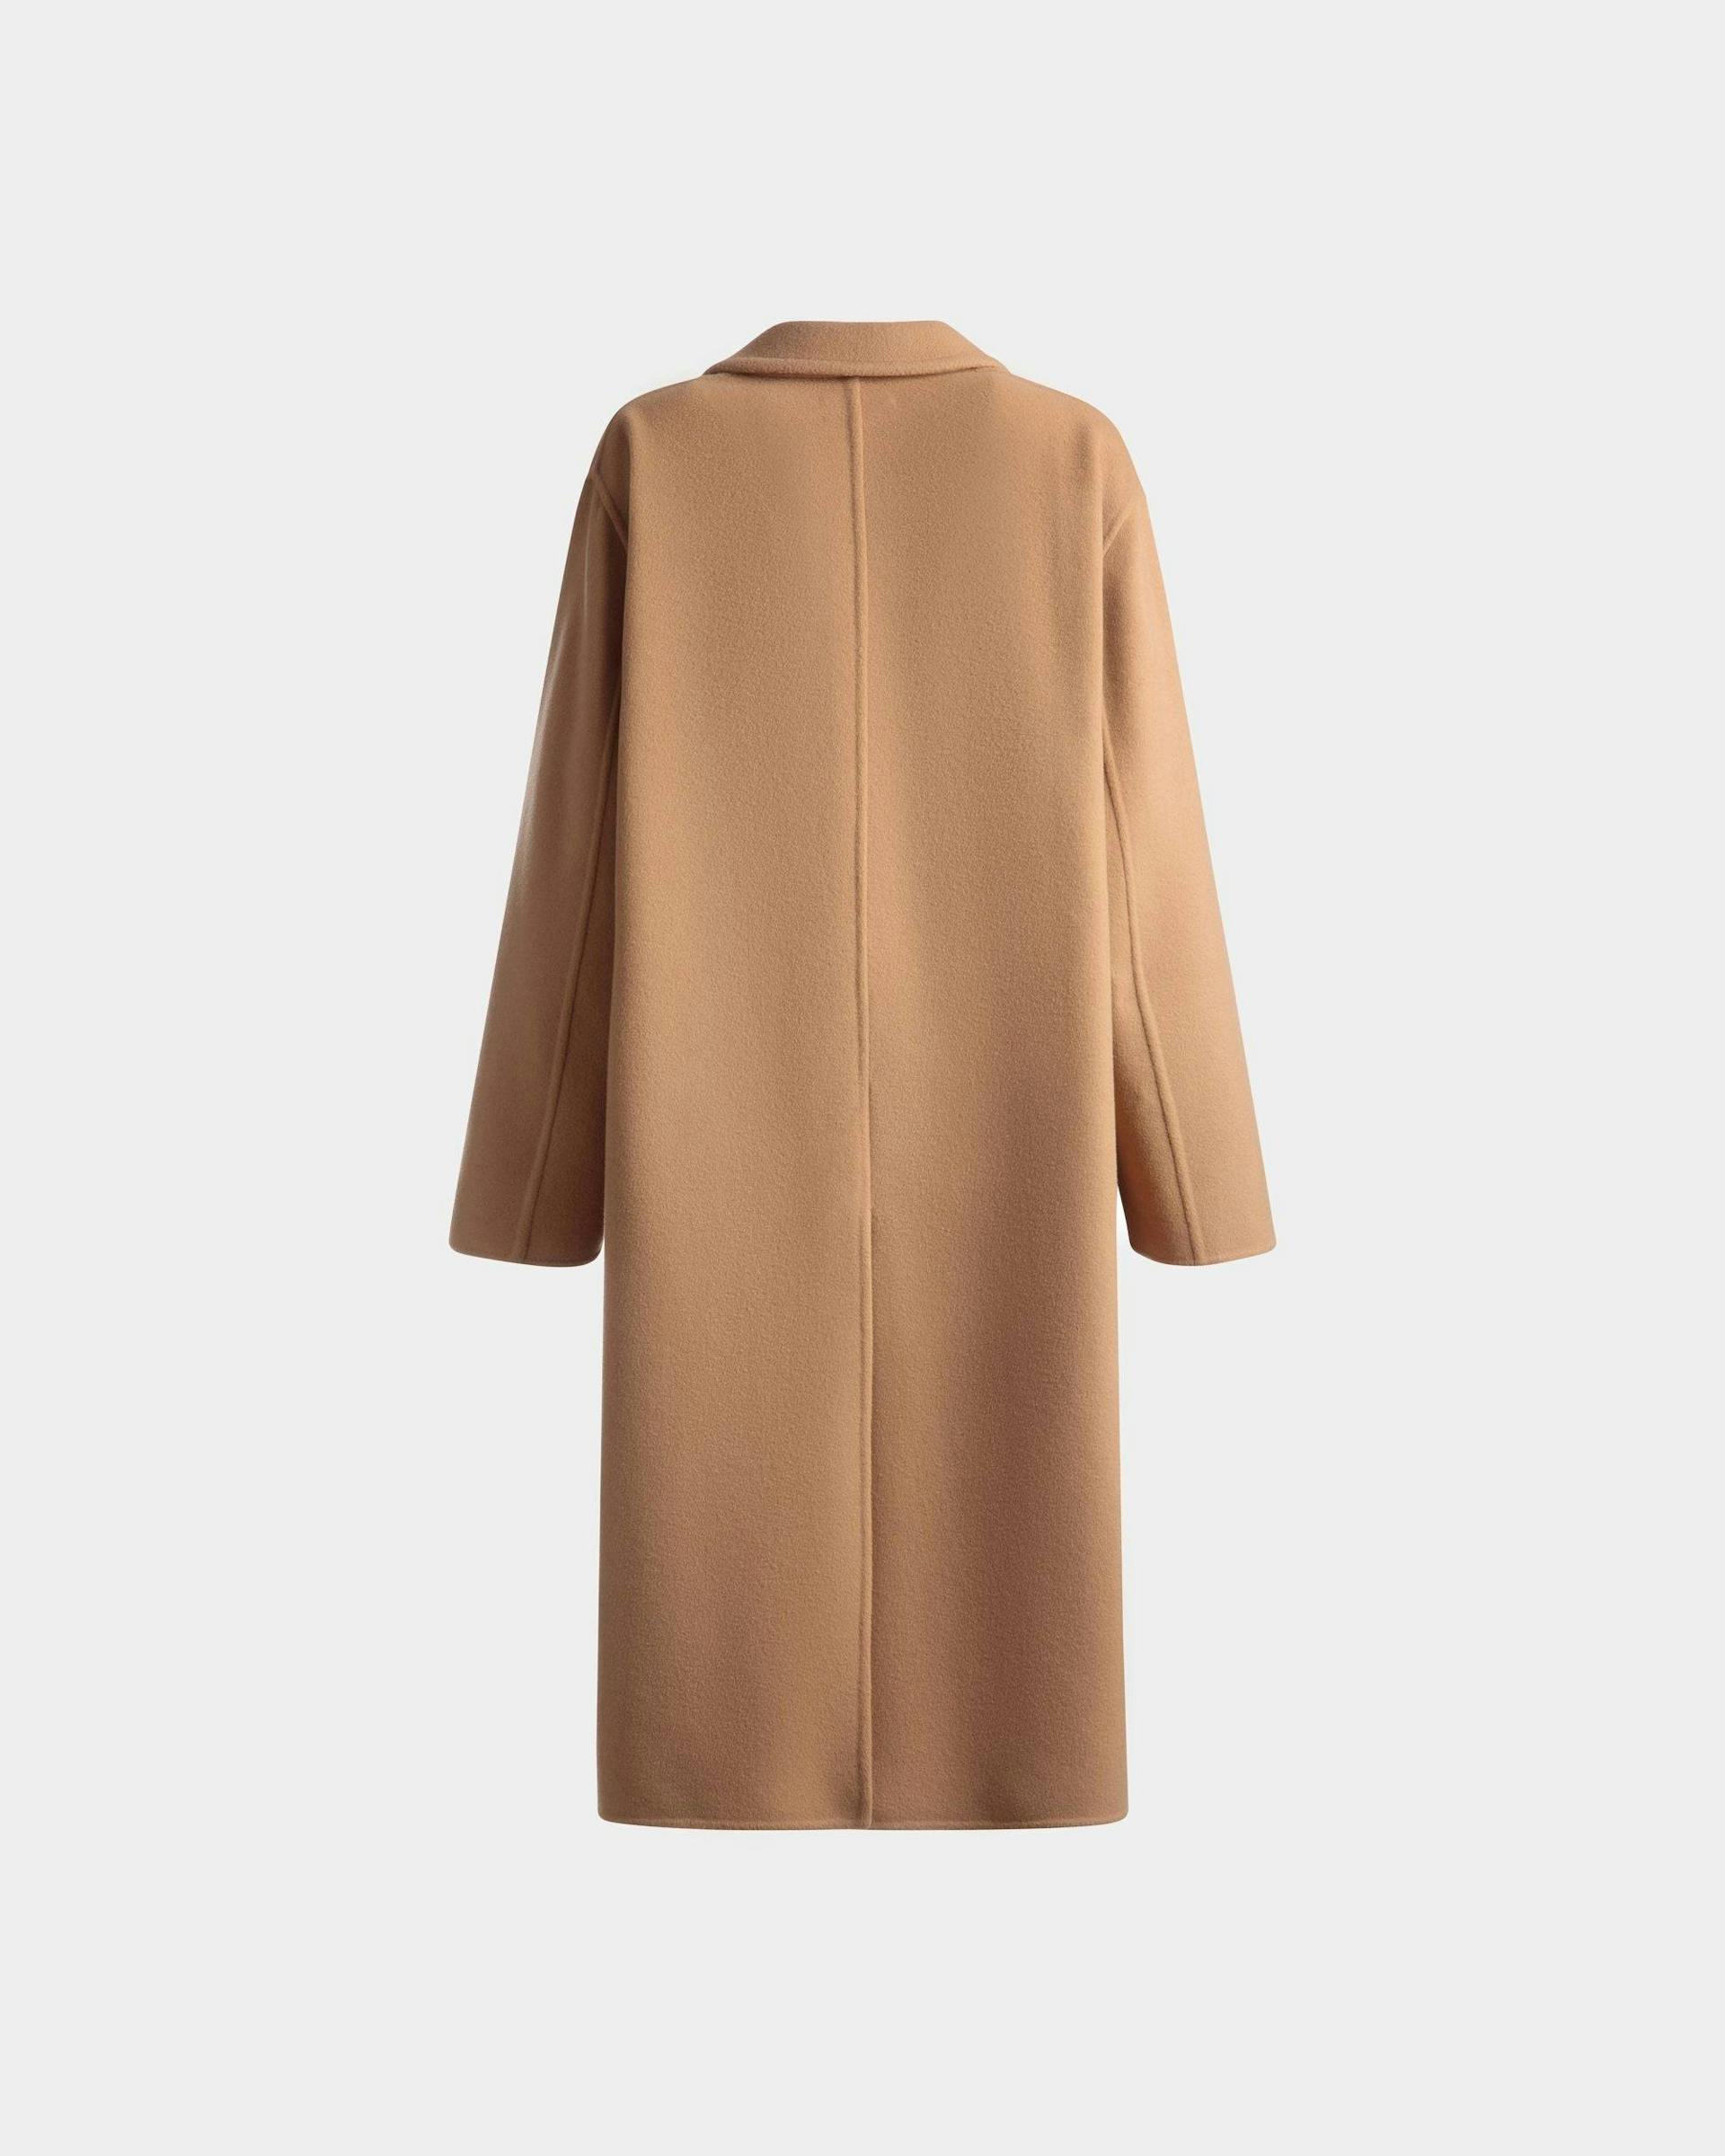 Women's Single-Breasted Coat In Camel Cashmere Wool Mix | Bally | Still Life Back